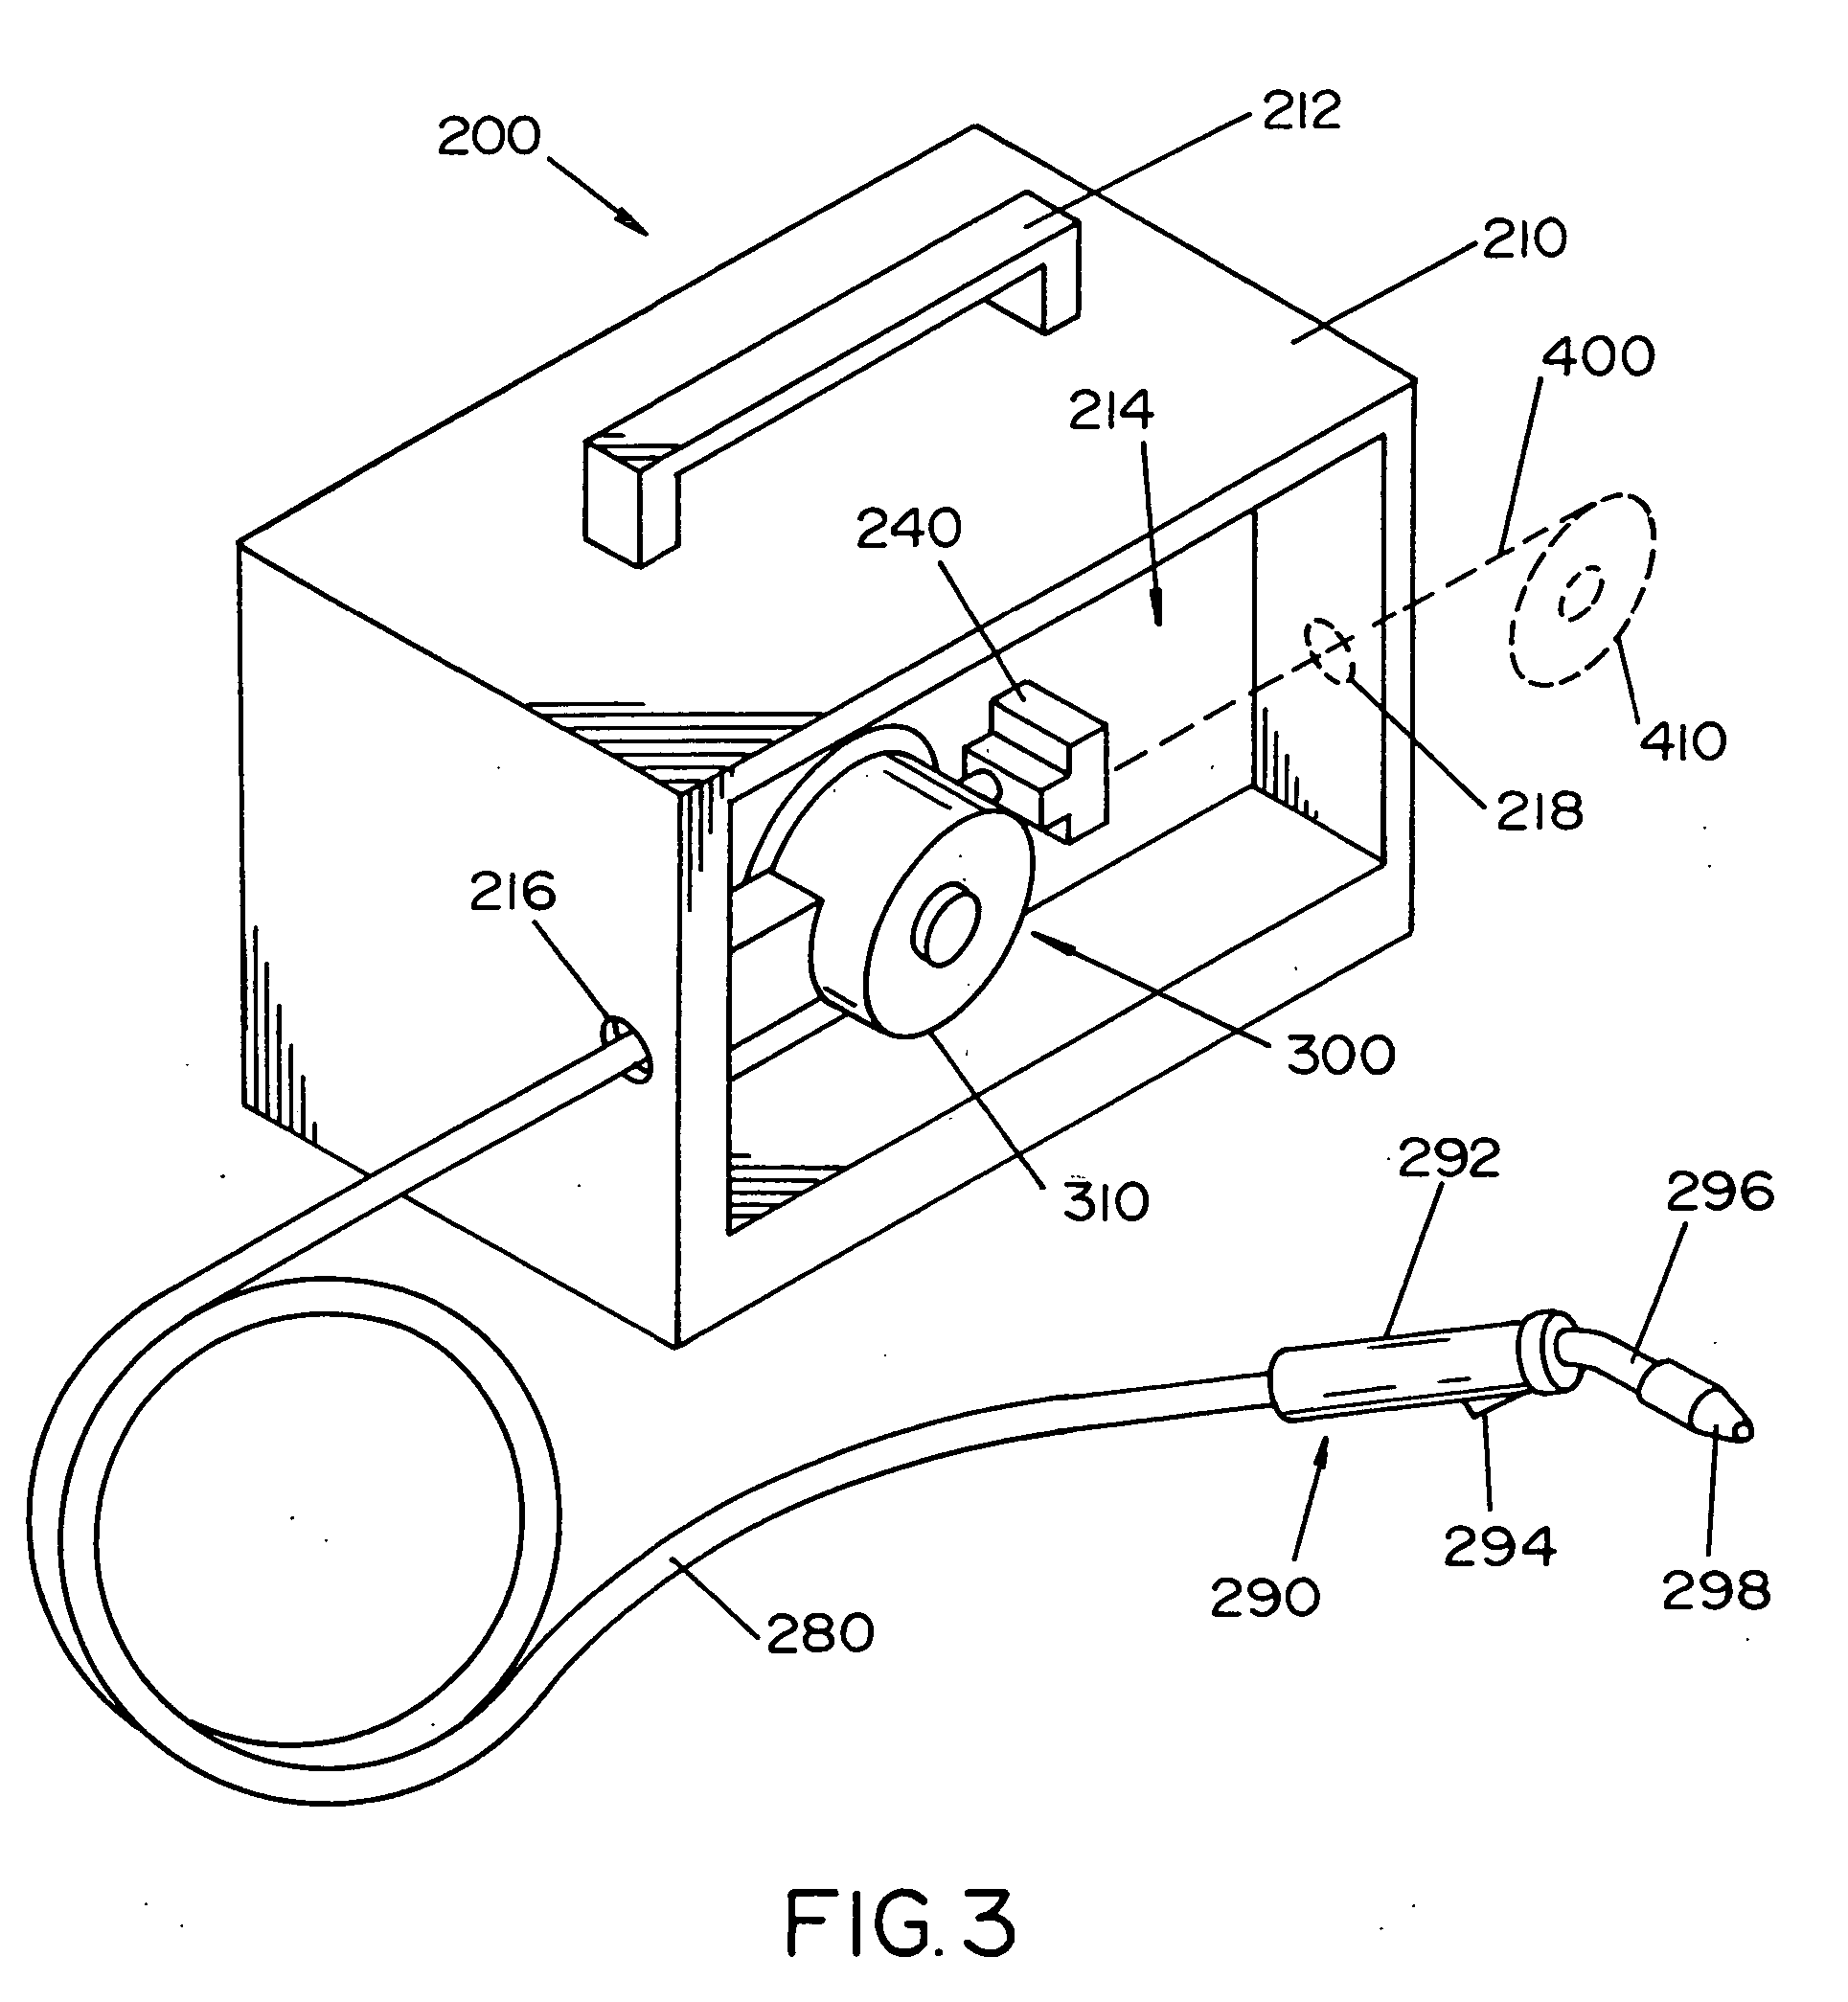 Interchangeable wire drive for wire feeder and spool gun